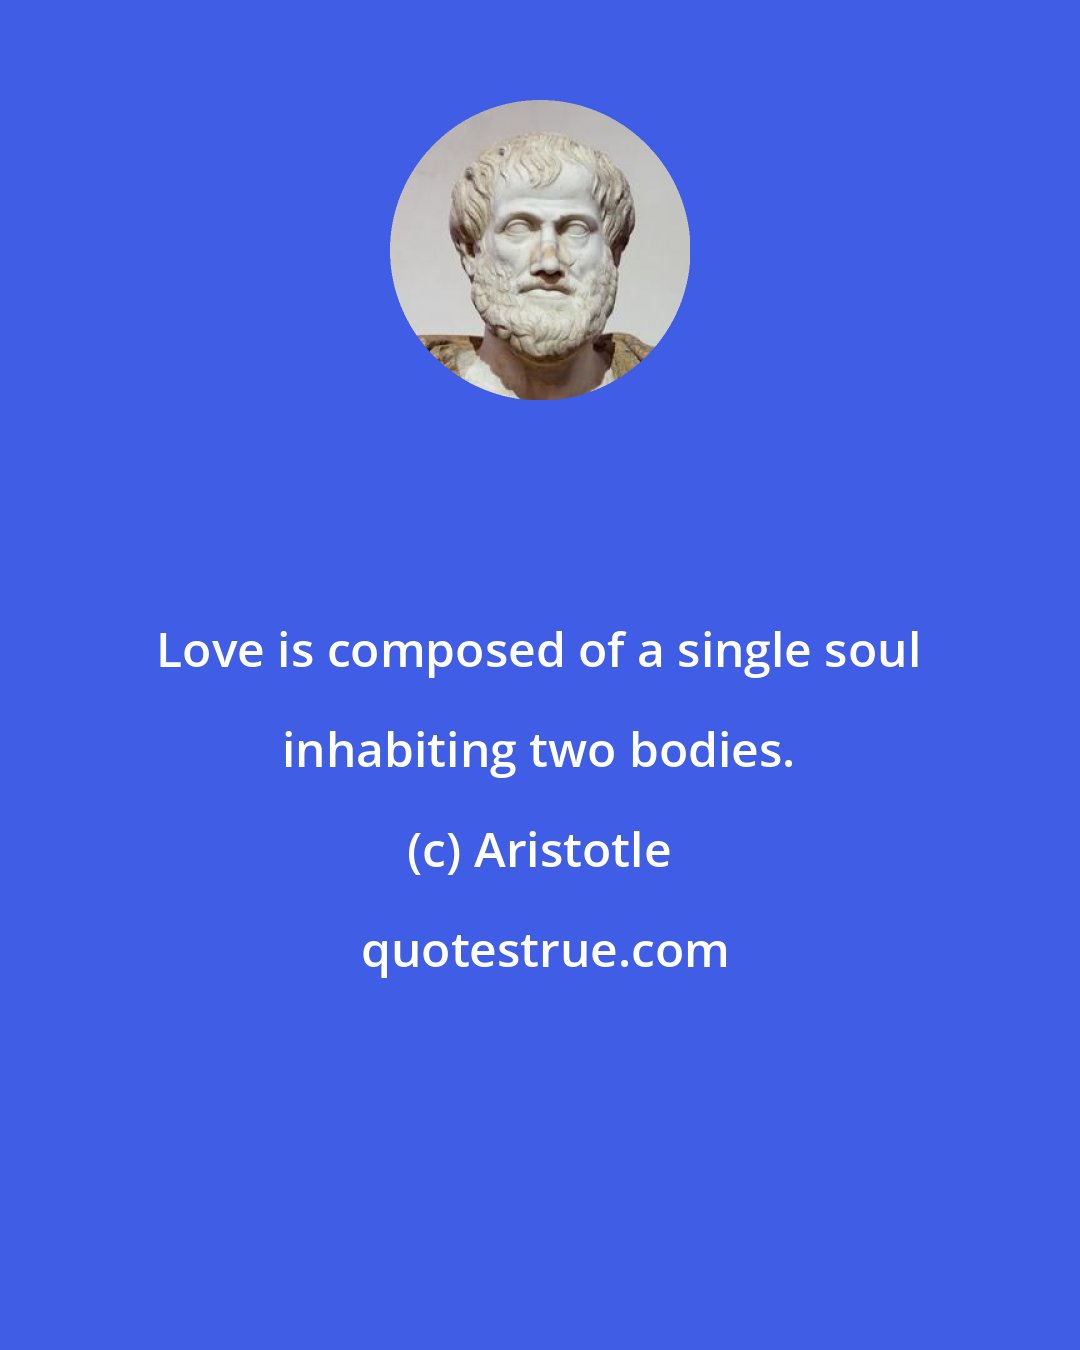 Aristotle: Love is composed of a single soul inhabiting two bodies.